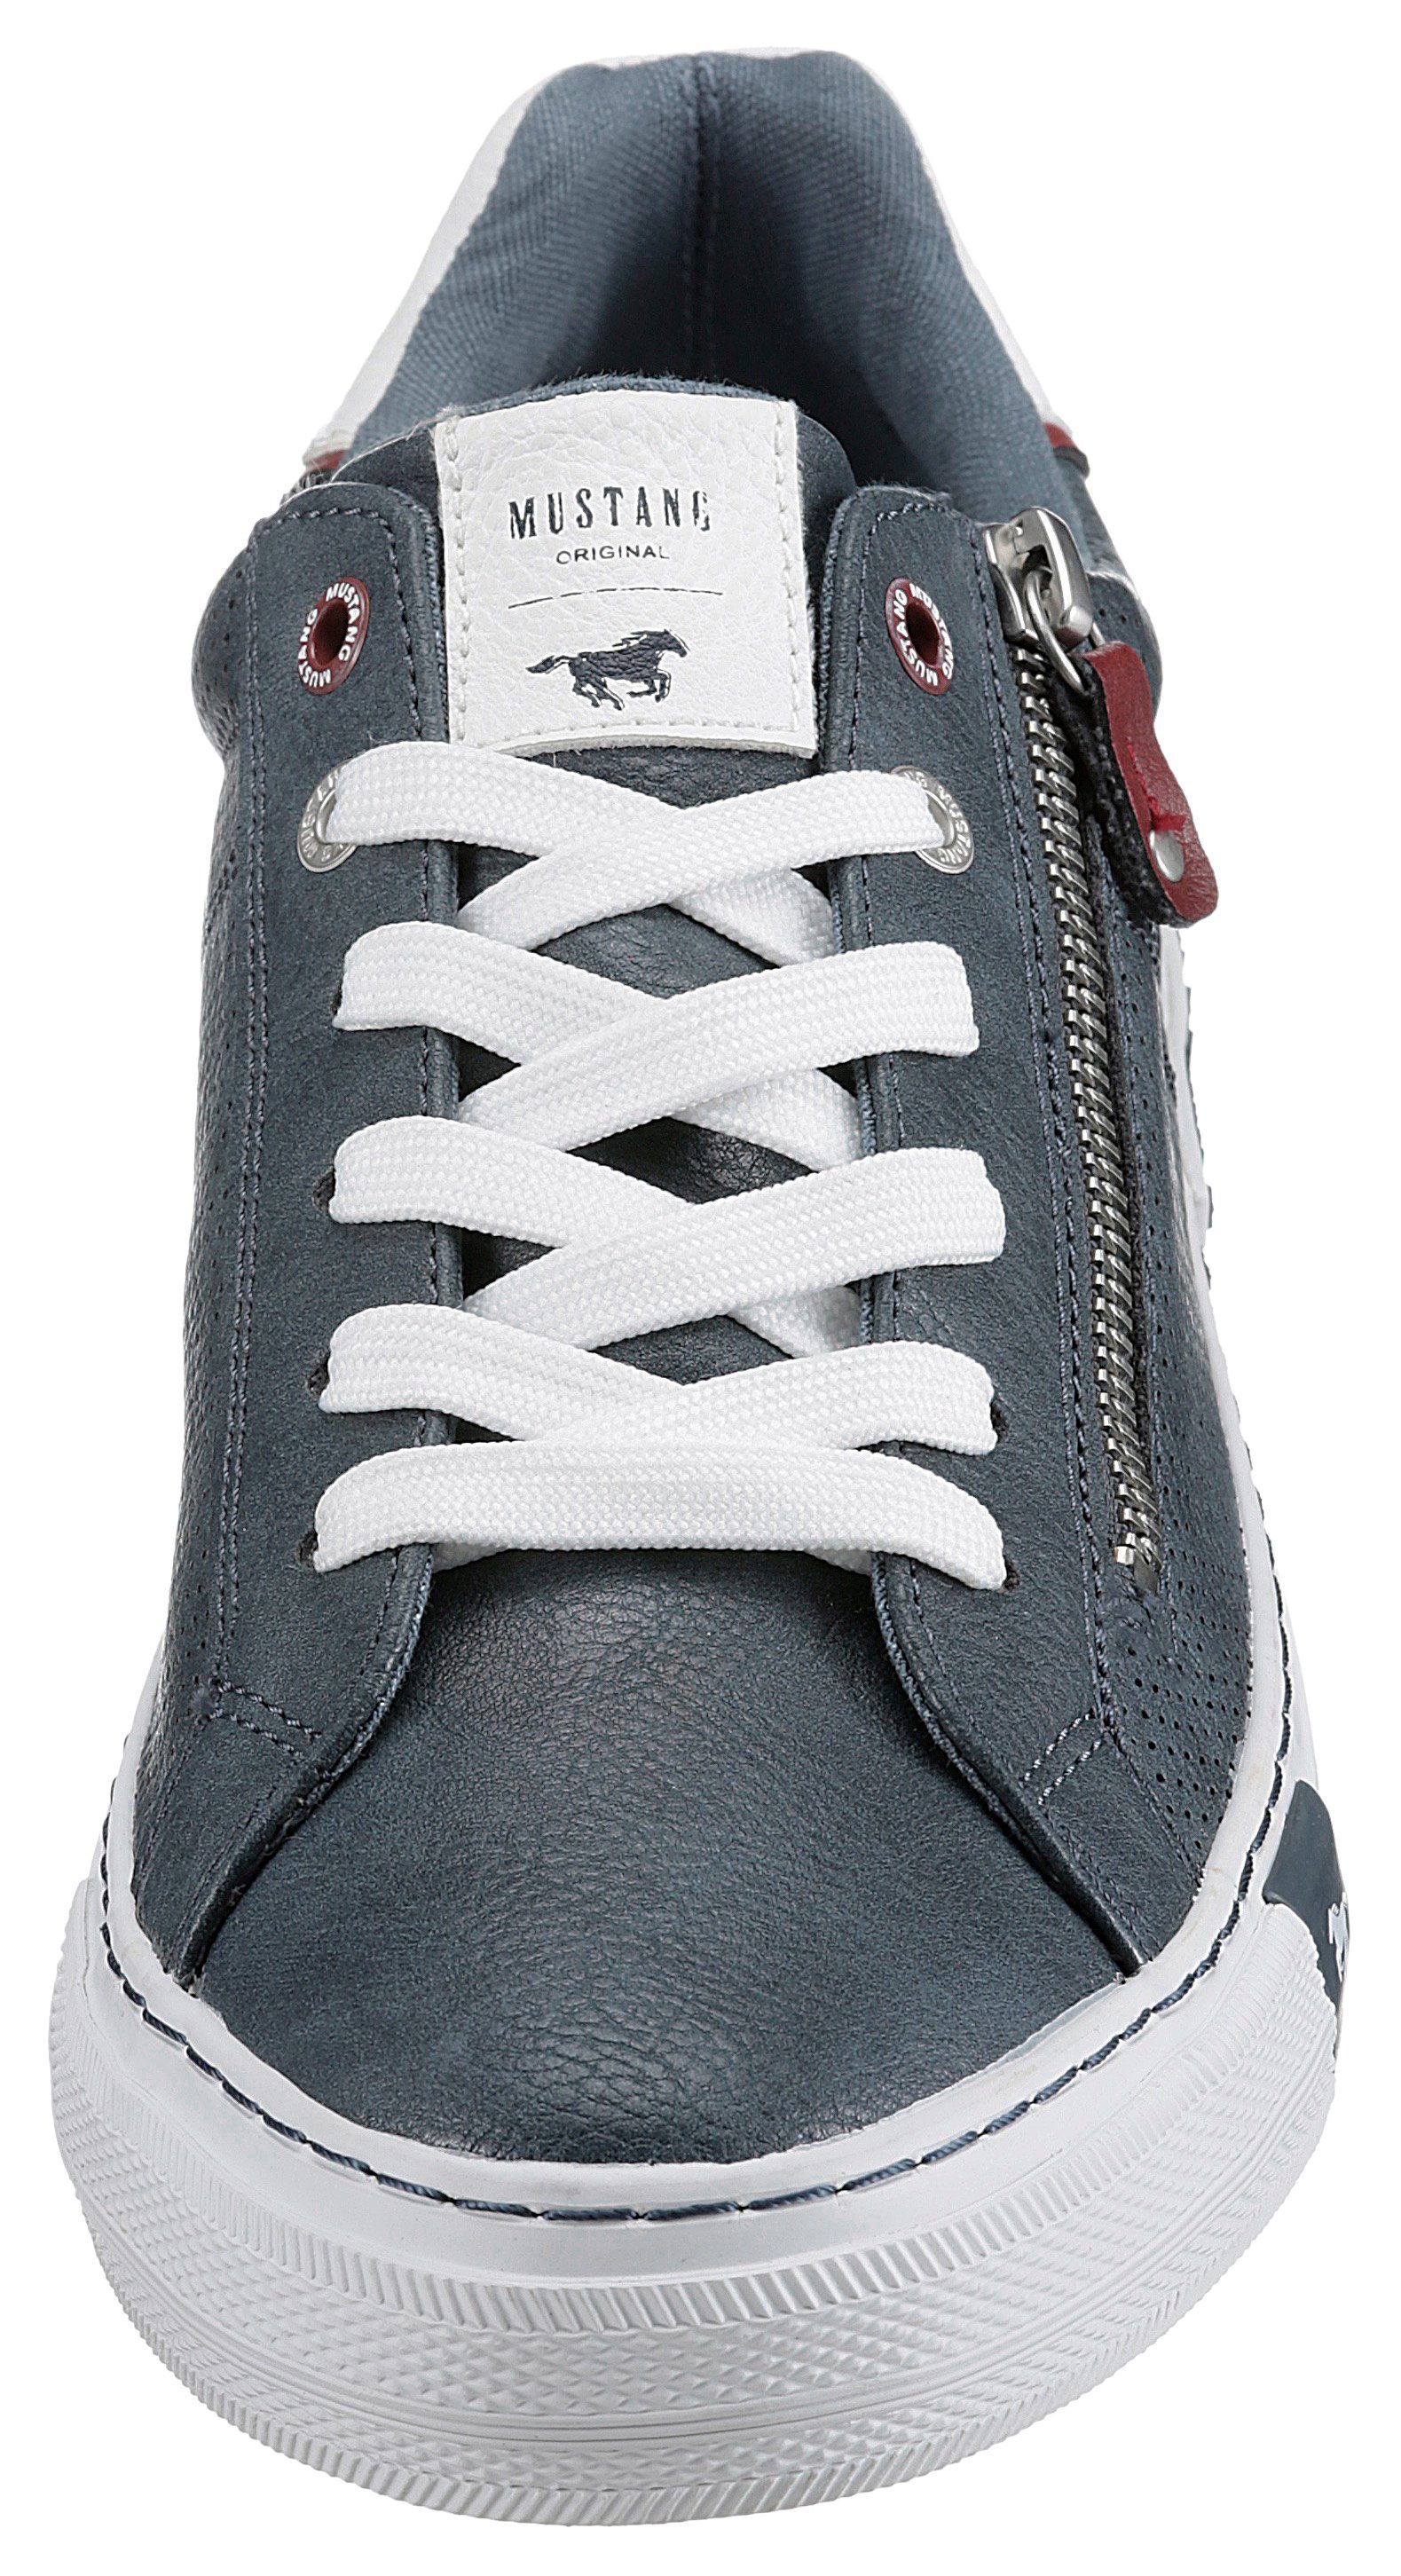 mit Mustang jeansblau Perforation Sneaker Shoes